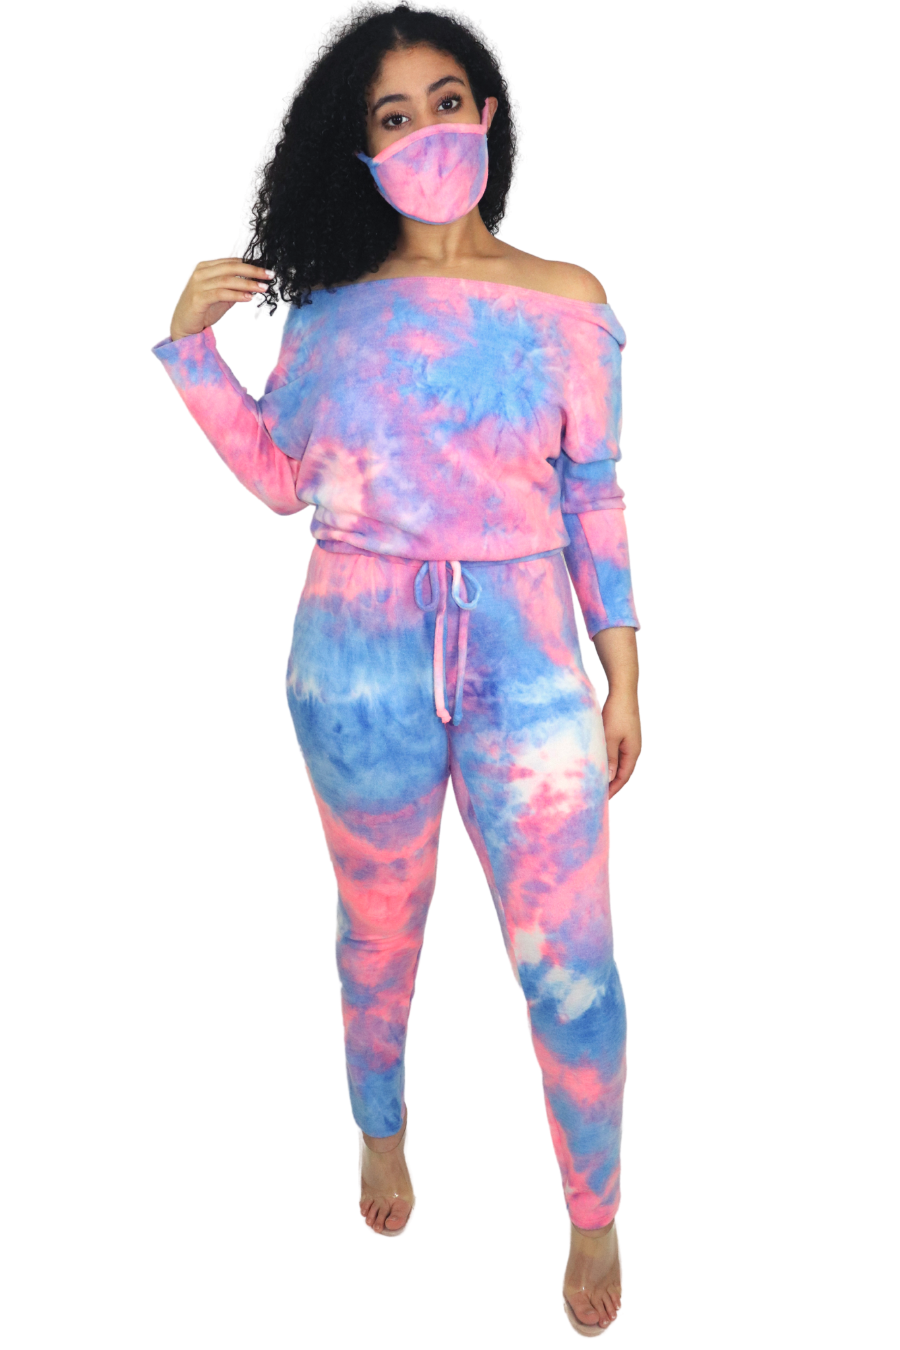 Vegan clothing, Let This Tie Dye Jumpsuit Set Become Your Favorite Outfit 2 Piece Open Shoulder & Including Matching Face Mask Stretch & Comfortable Jumpsuit True To Size